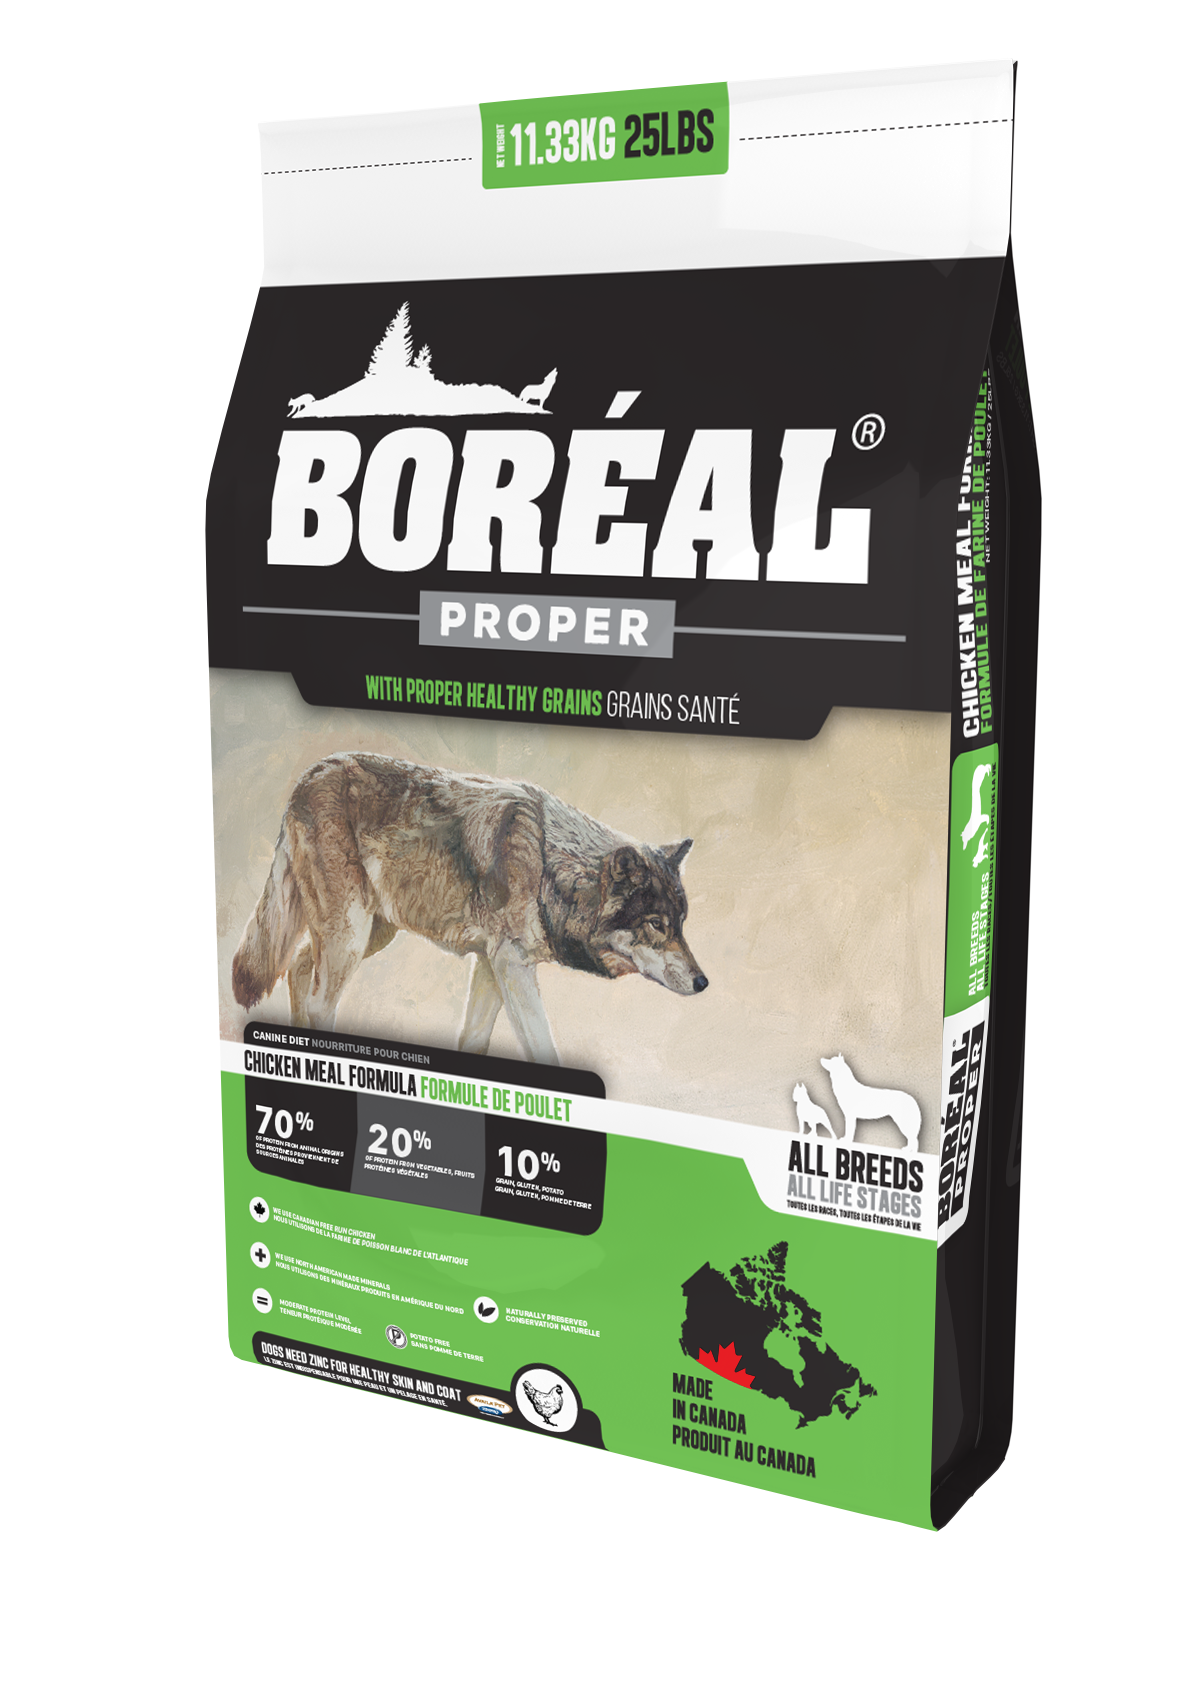 Boréal Functional Proper Healthy Grains Dog food, All Breeds, All Life Stages, Chicken Meal Formula